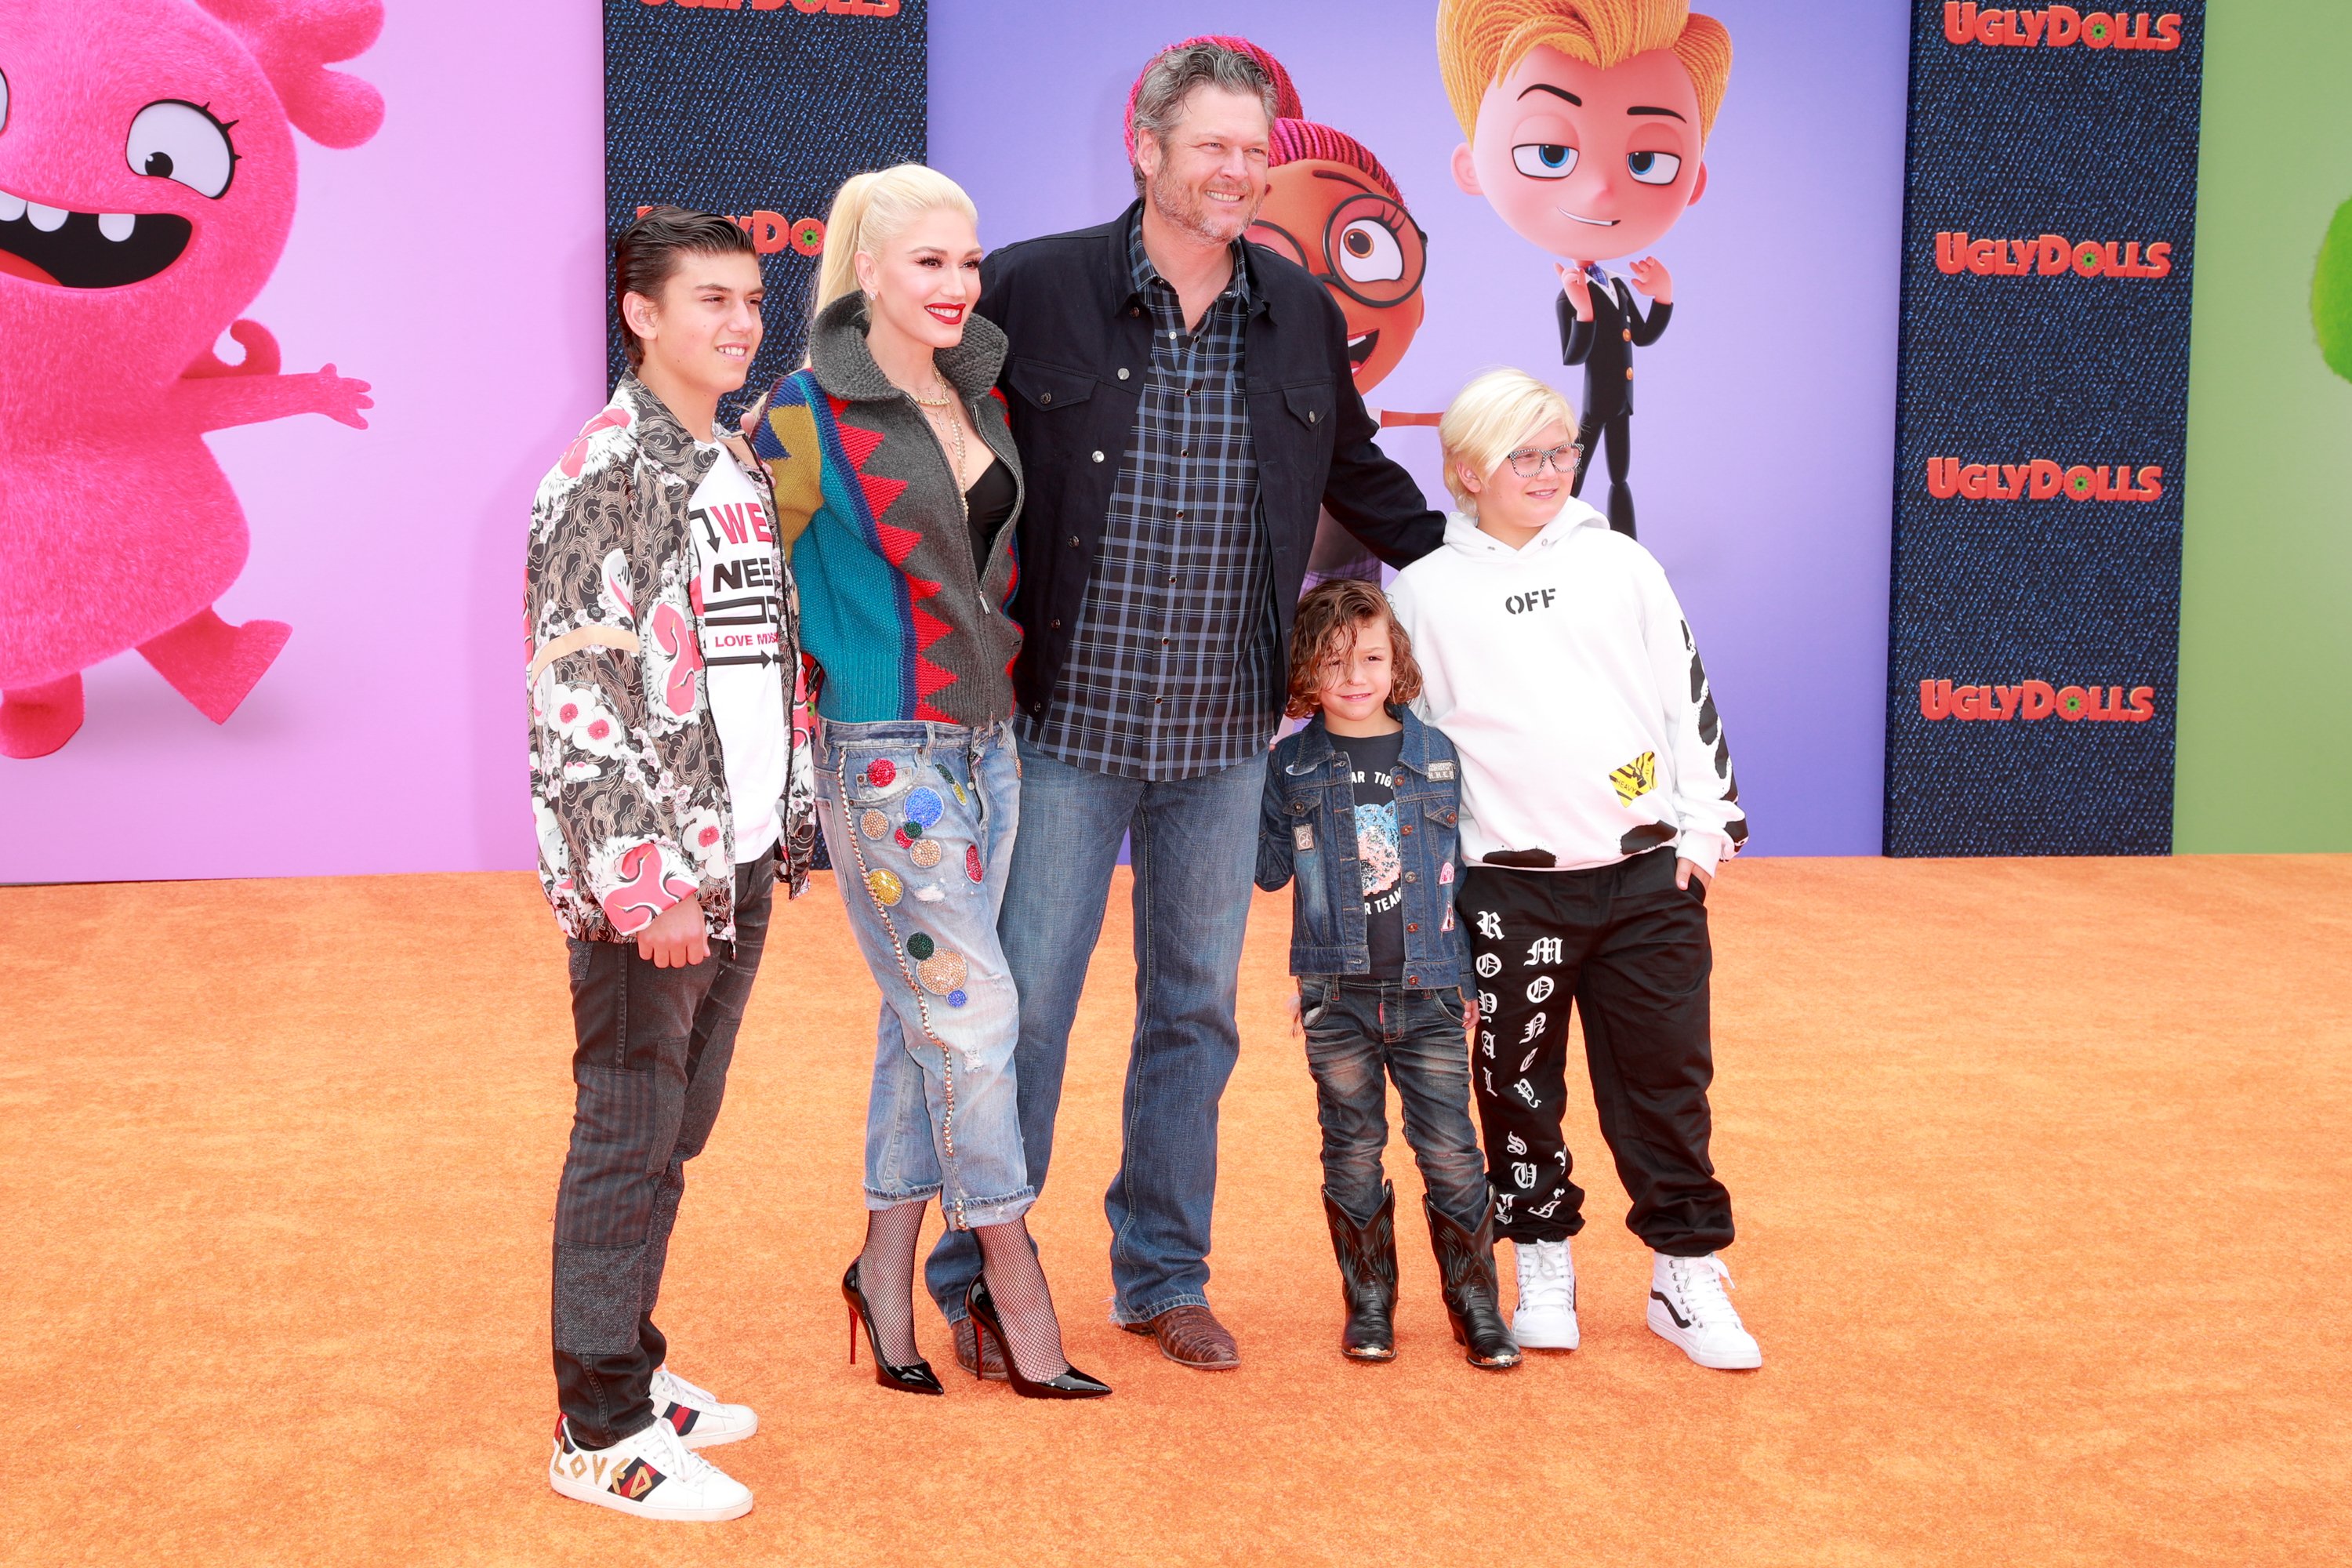 Gwen Stefani and Shelton with her 3 boys at STX Films World Premiere of "UglyDolls" at Regal Cinemas L.A n 2019. | Photo: Getty Images